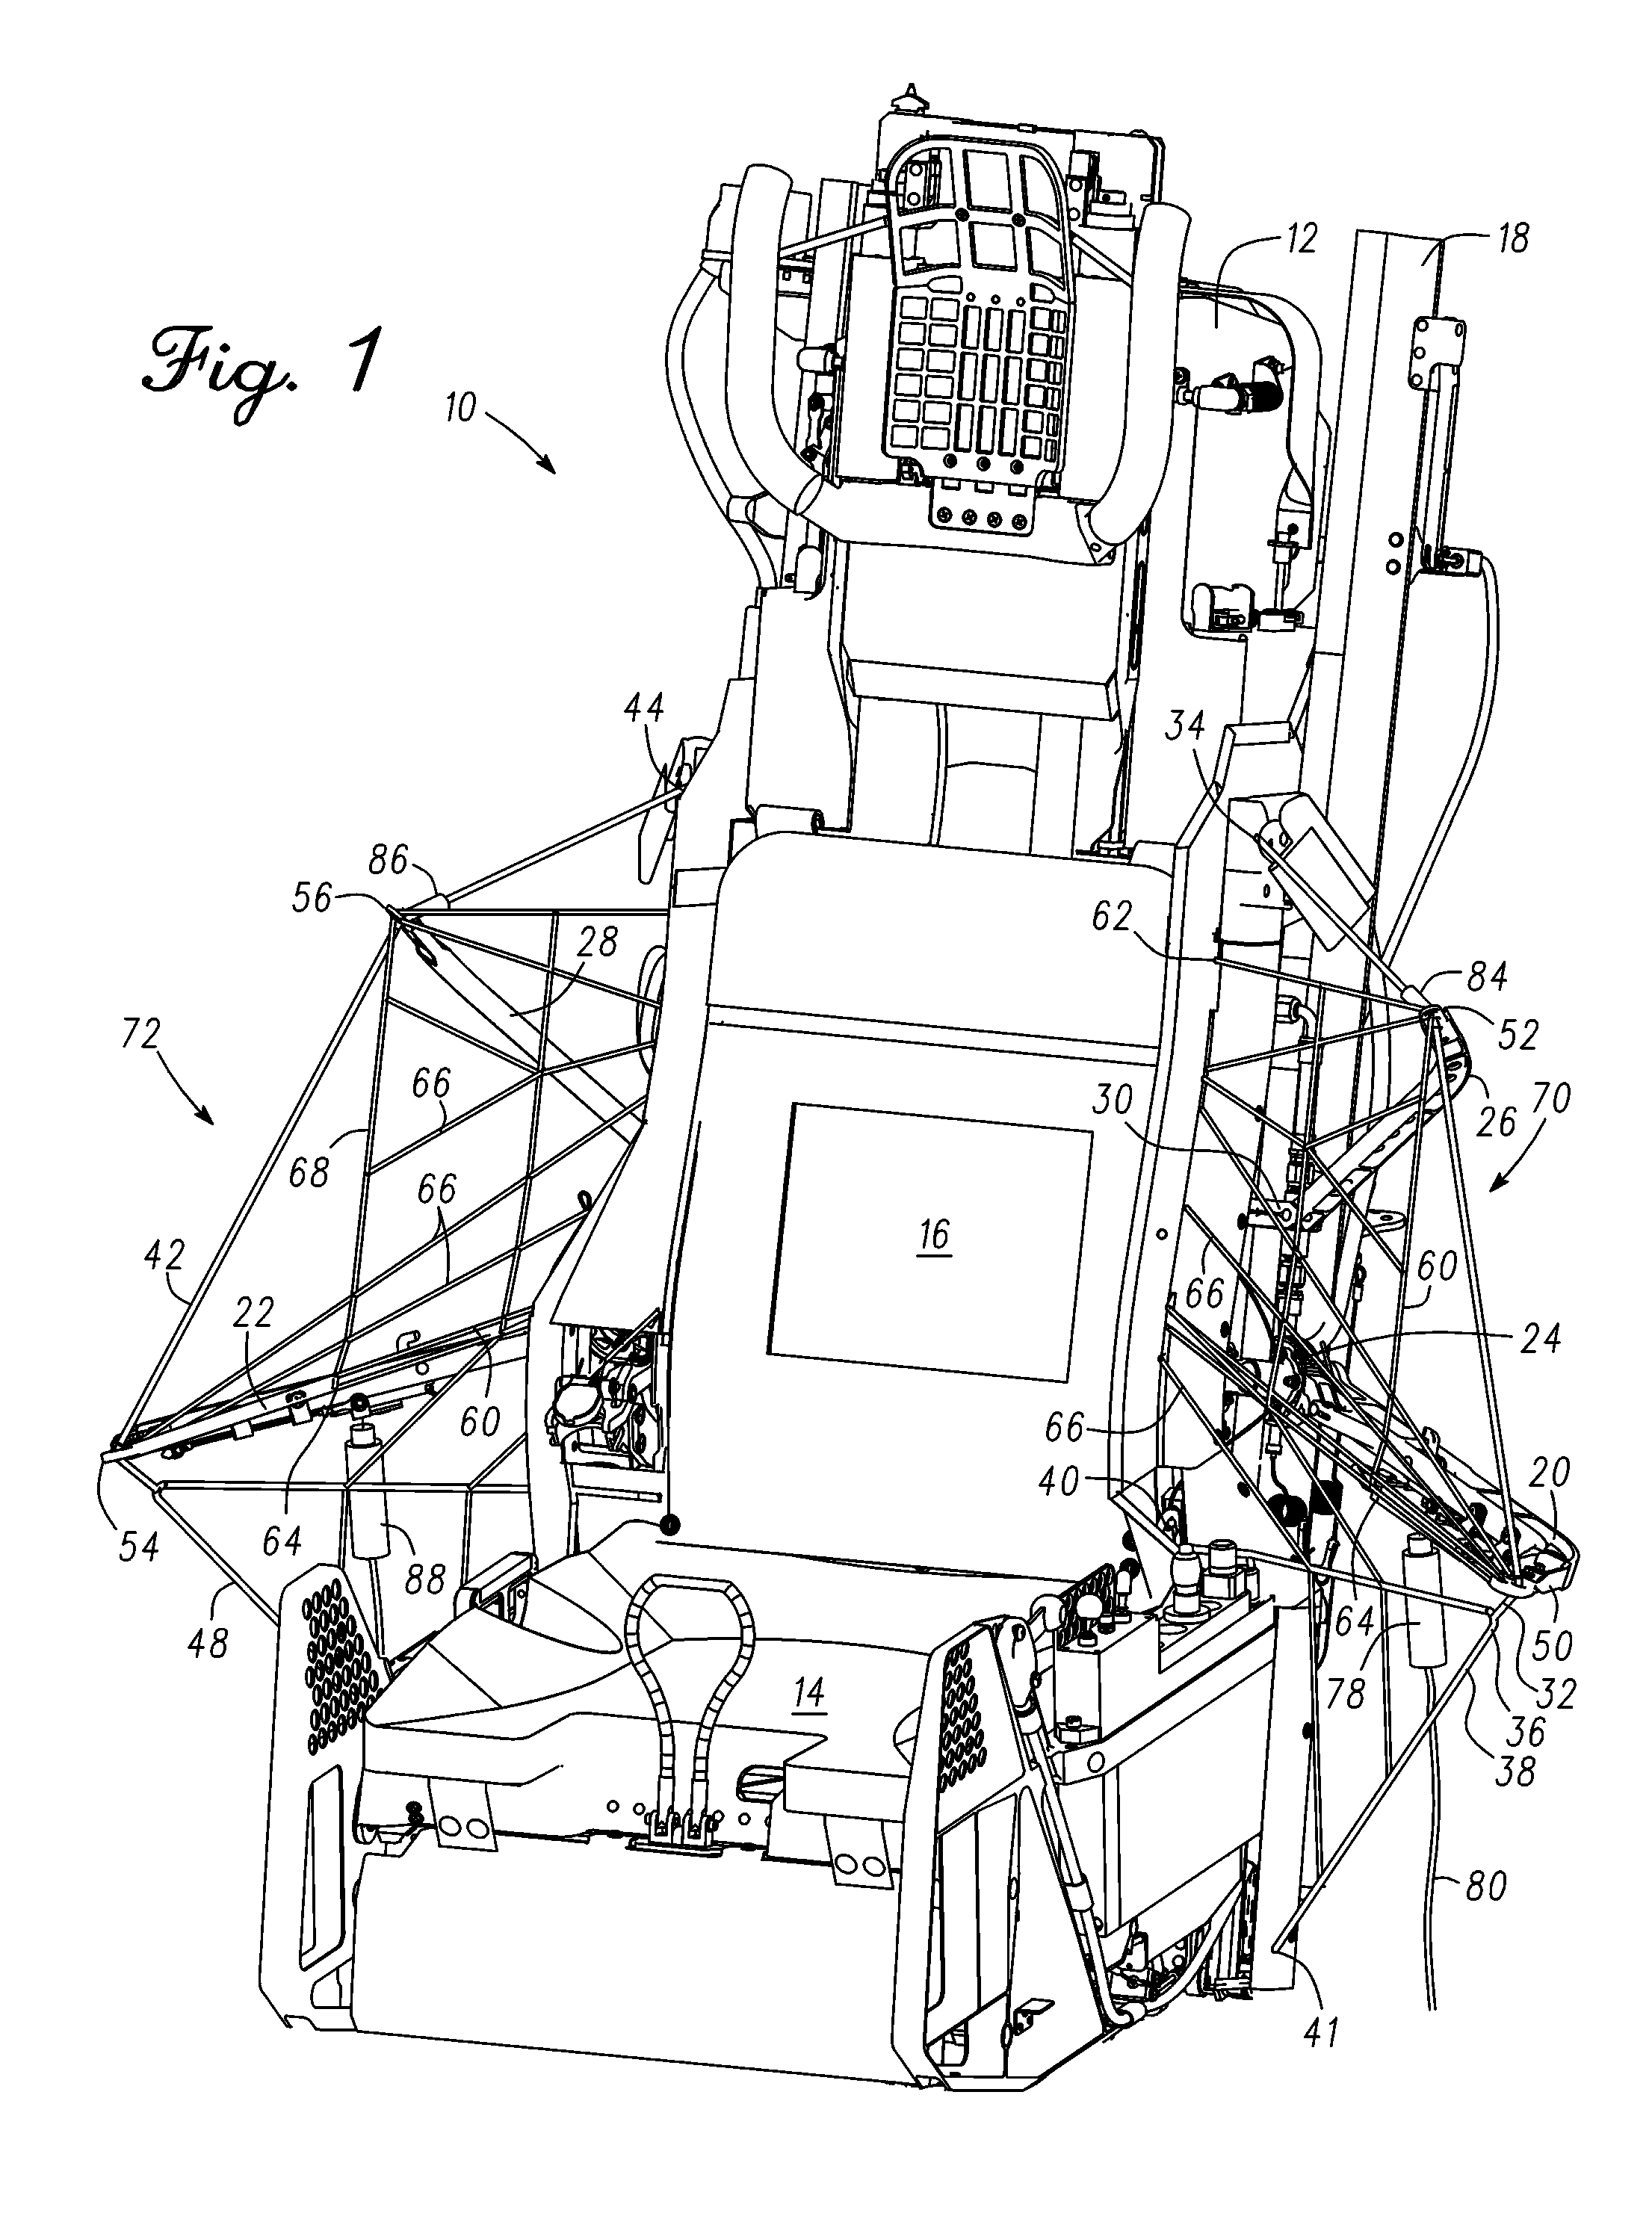 Passive ejection seat arm flail restraint apparatus and method